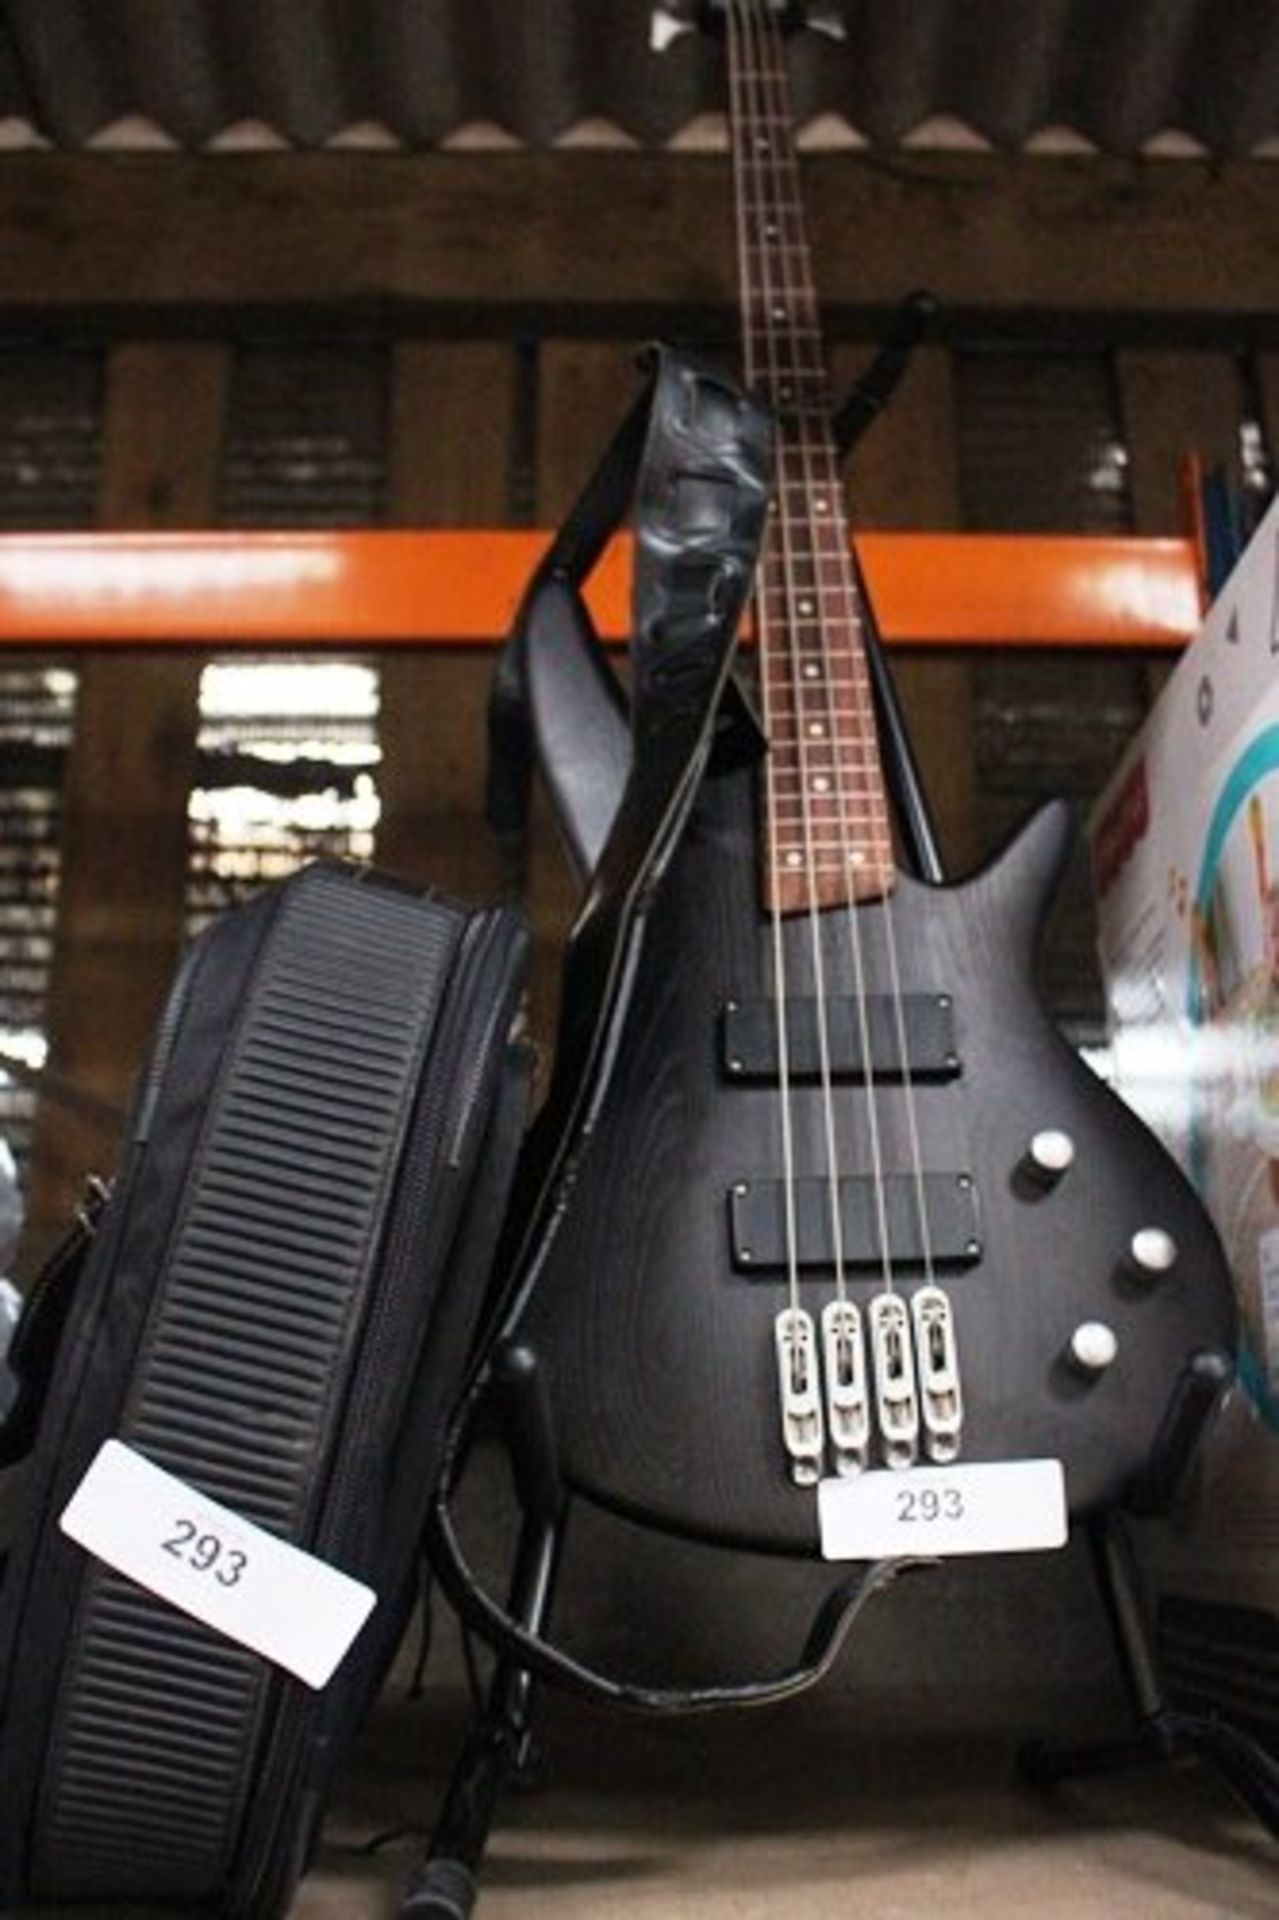 A Sanshi black and brushed aluminium bass guitar - Used, in good condition 1 small mark on neck,